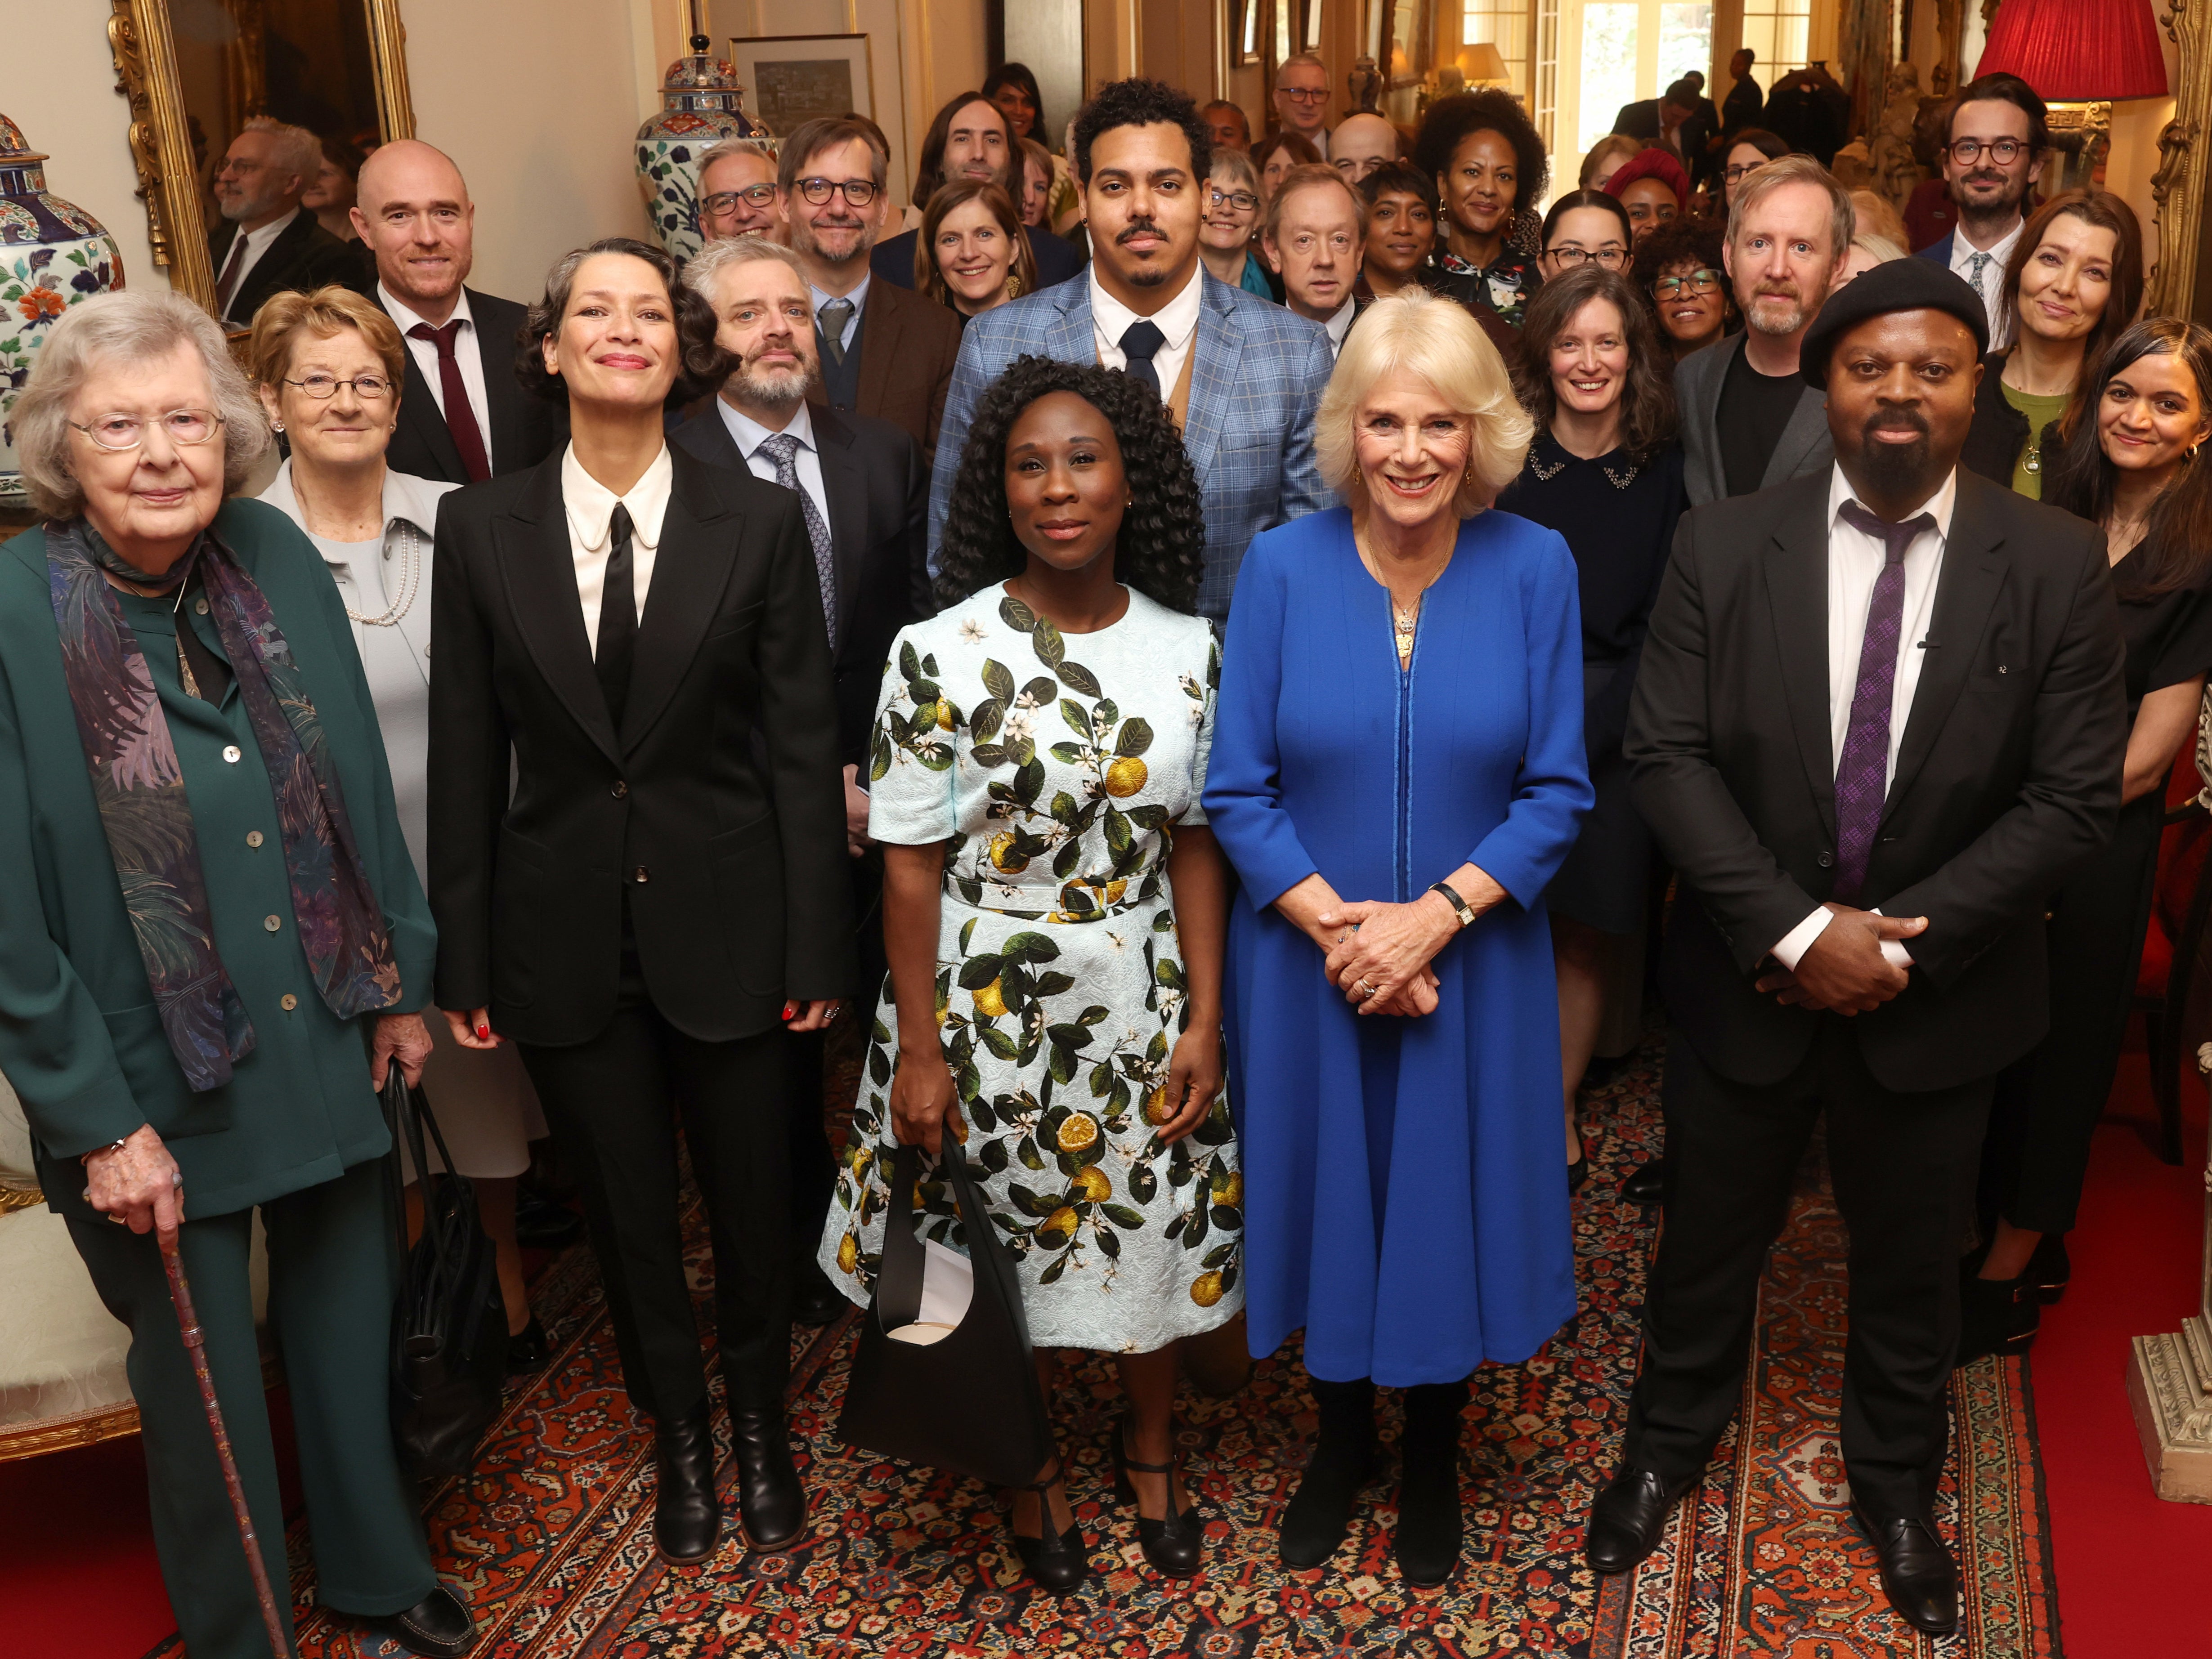 Queen Camilla and the people of the Booker Prize Foundation